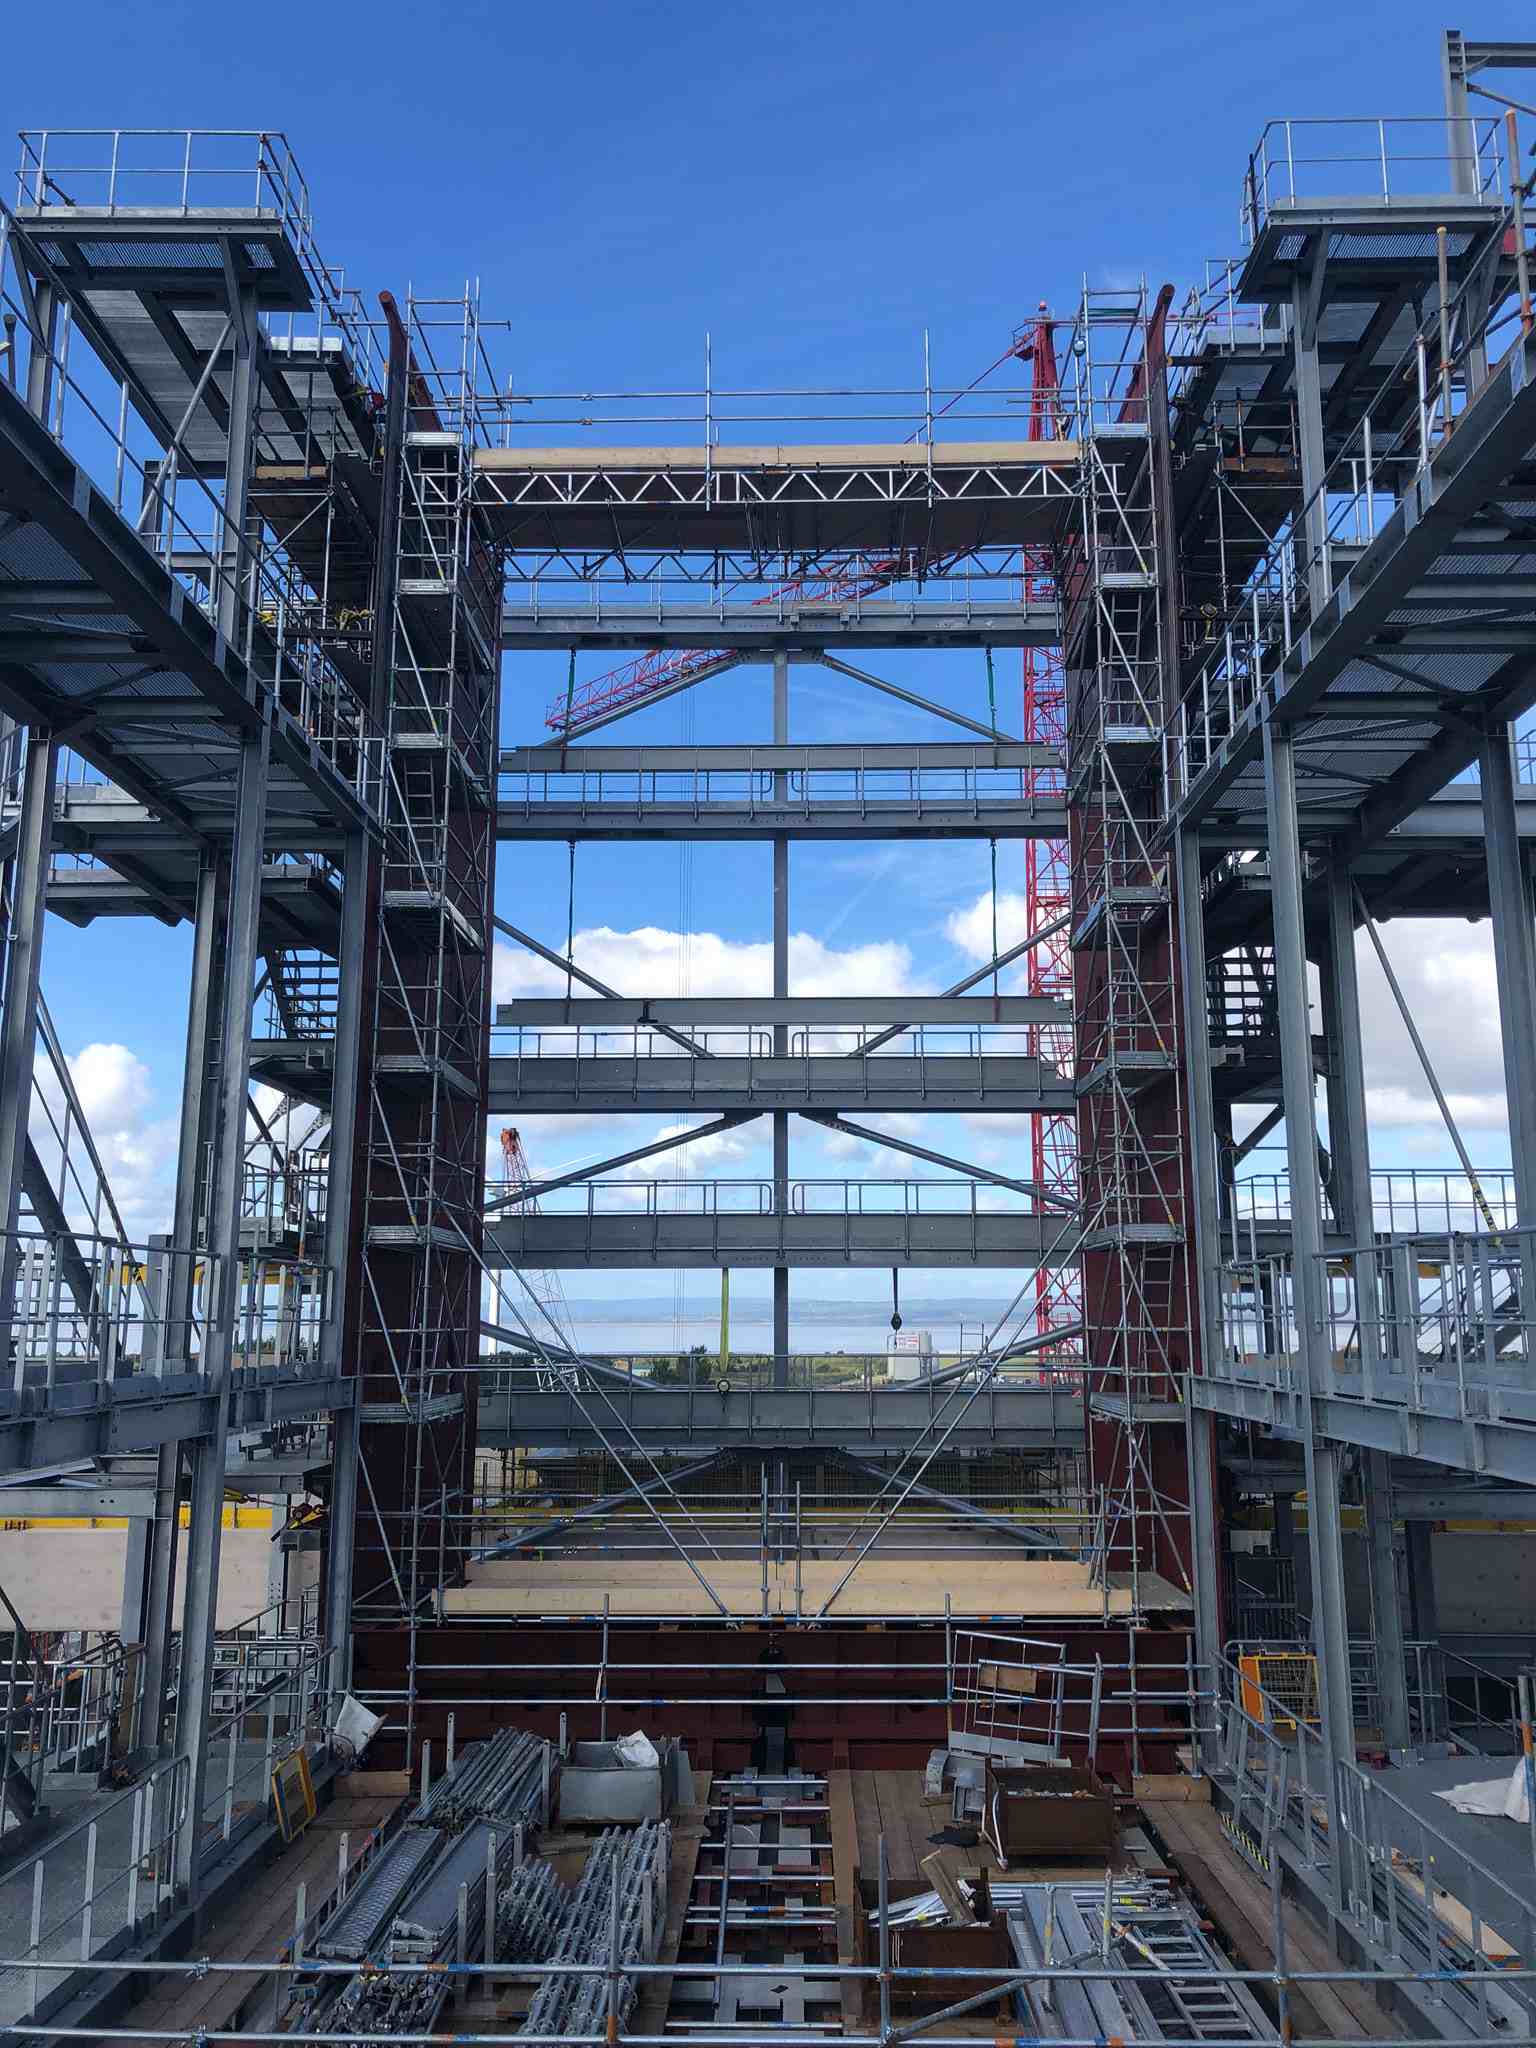 Access scaffolding of Avonmouth ERF